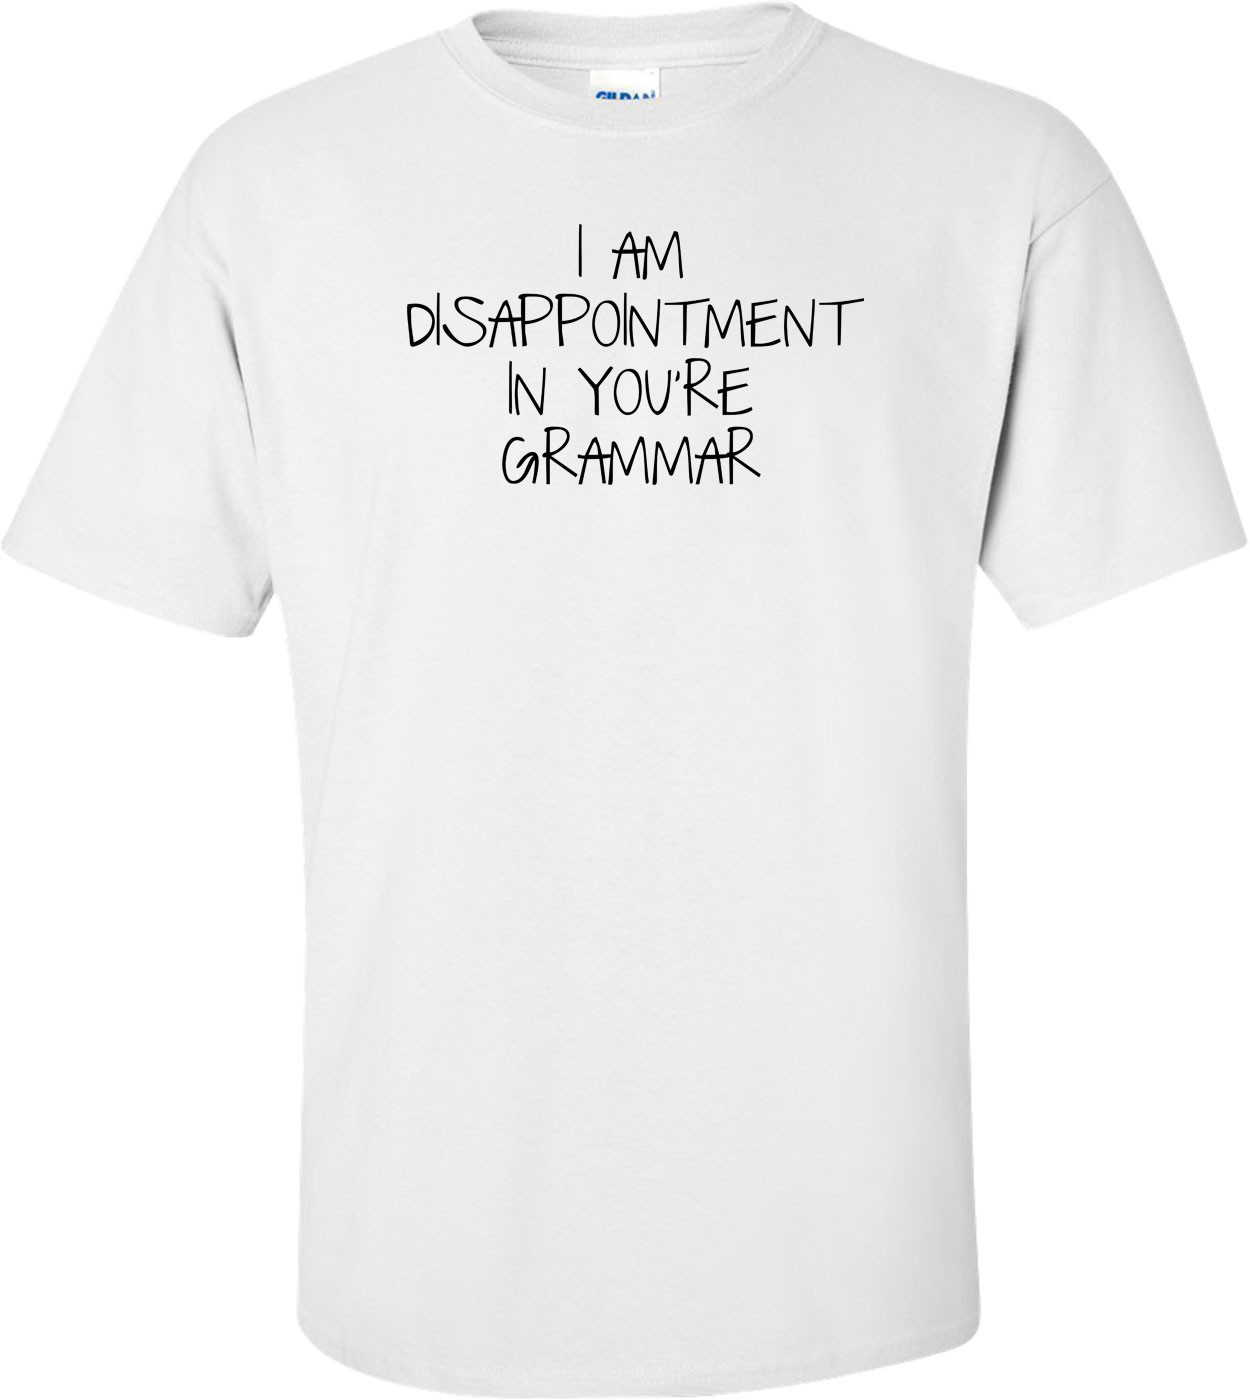 I Am Disappointment In You're Grammar Shirt